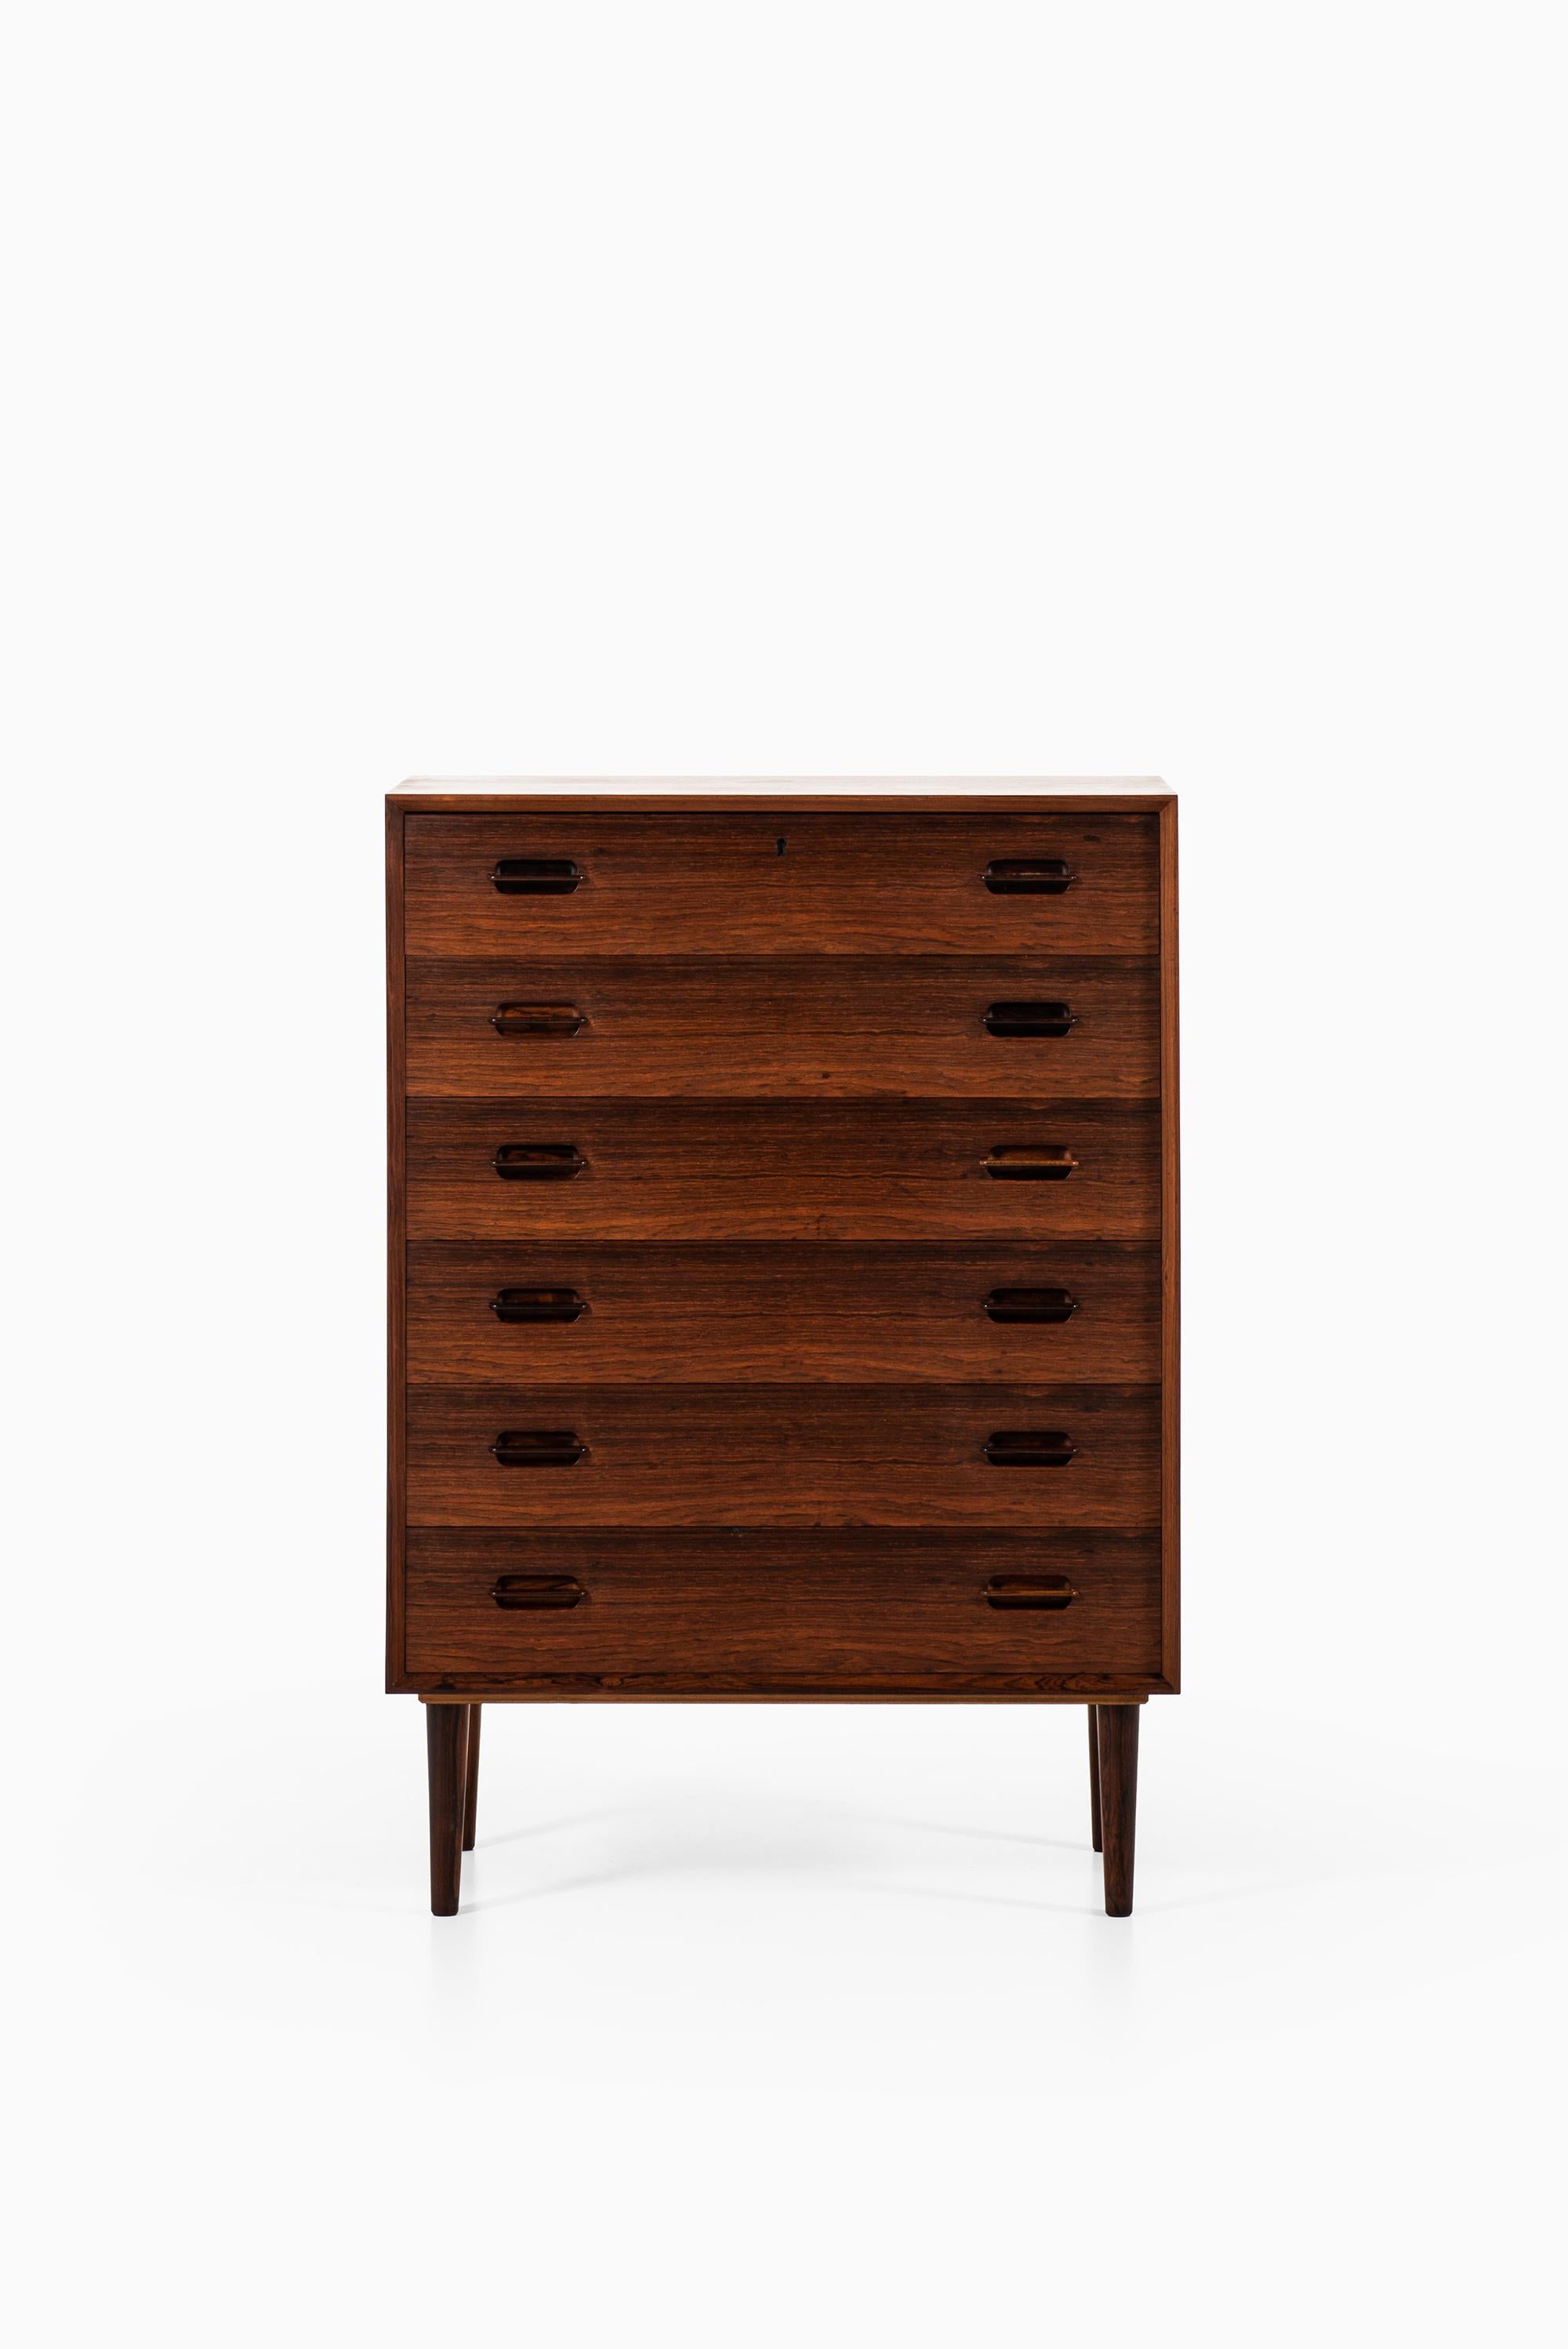 Very rare chest of drawers / bureau model 91 designed by Ejvind A. Johansson. Produced by Gern Møbelfabrik in Denmark.